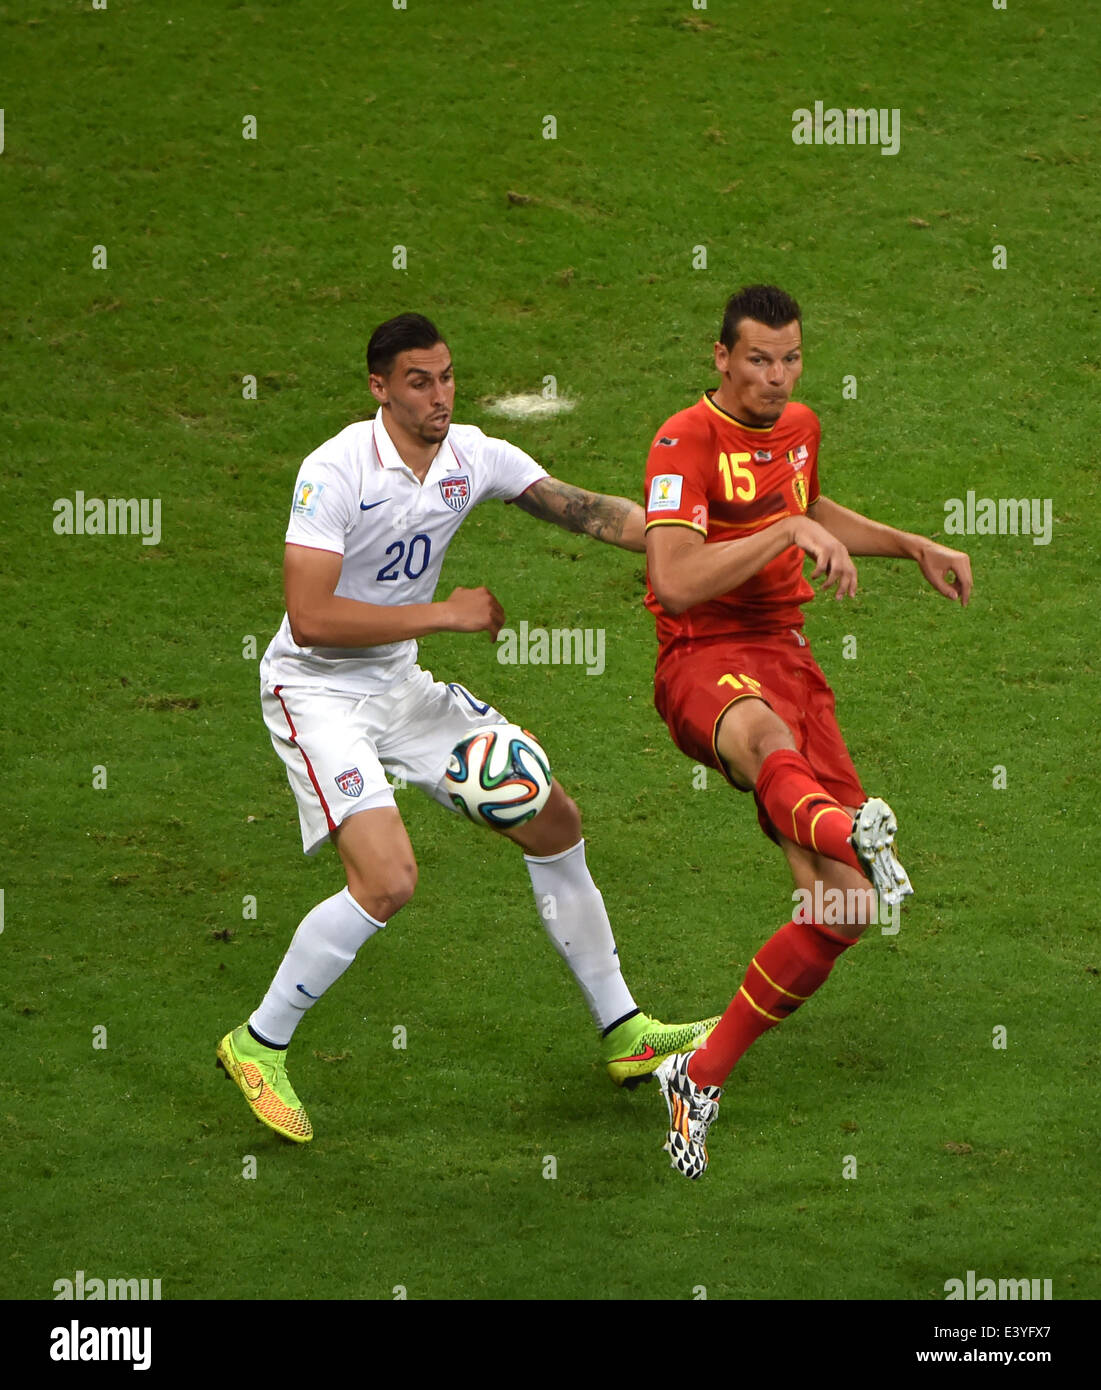 Salvador, Brazil. 1st July, 2014. Geoff Cameron (L) of the U.S. vies with Belgium's Daniel Van Buyten during a Round of 16 match between Belgium and the U.S. of 2014 FIFA World Cup at the Arena Fonte Nova Stadium in Salvador, Brazil, on July 1, 2014. Credit:  Guo Yong/Xinhua/Alamy Live News Stock Photo